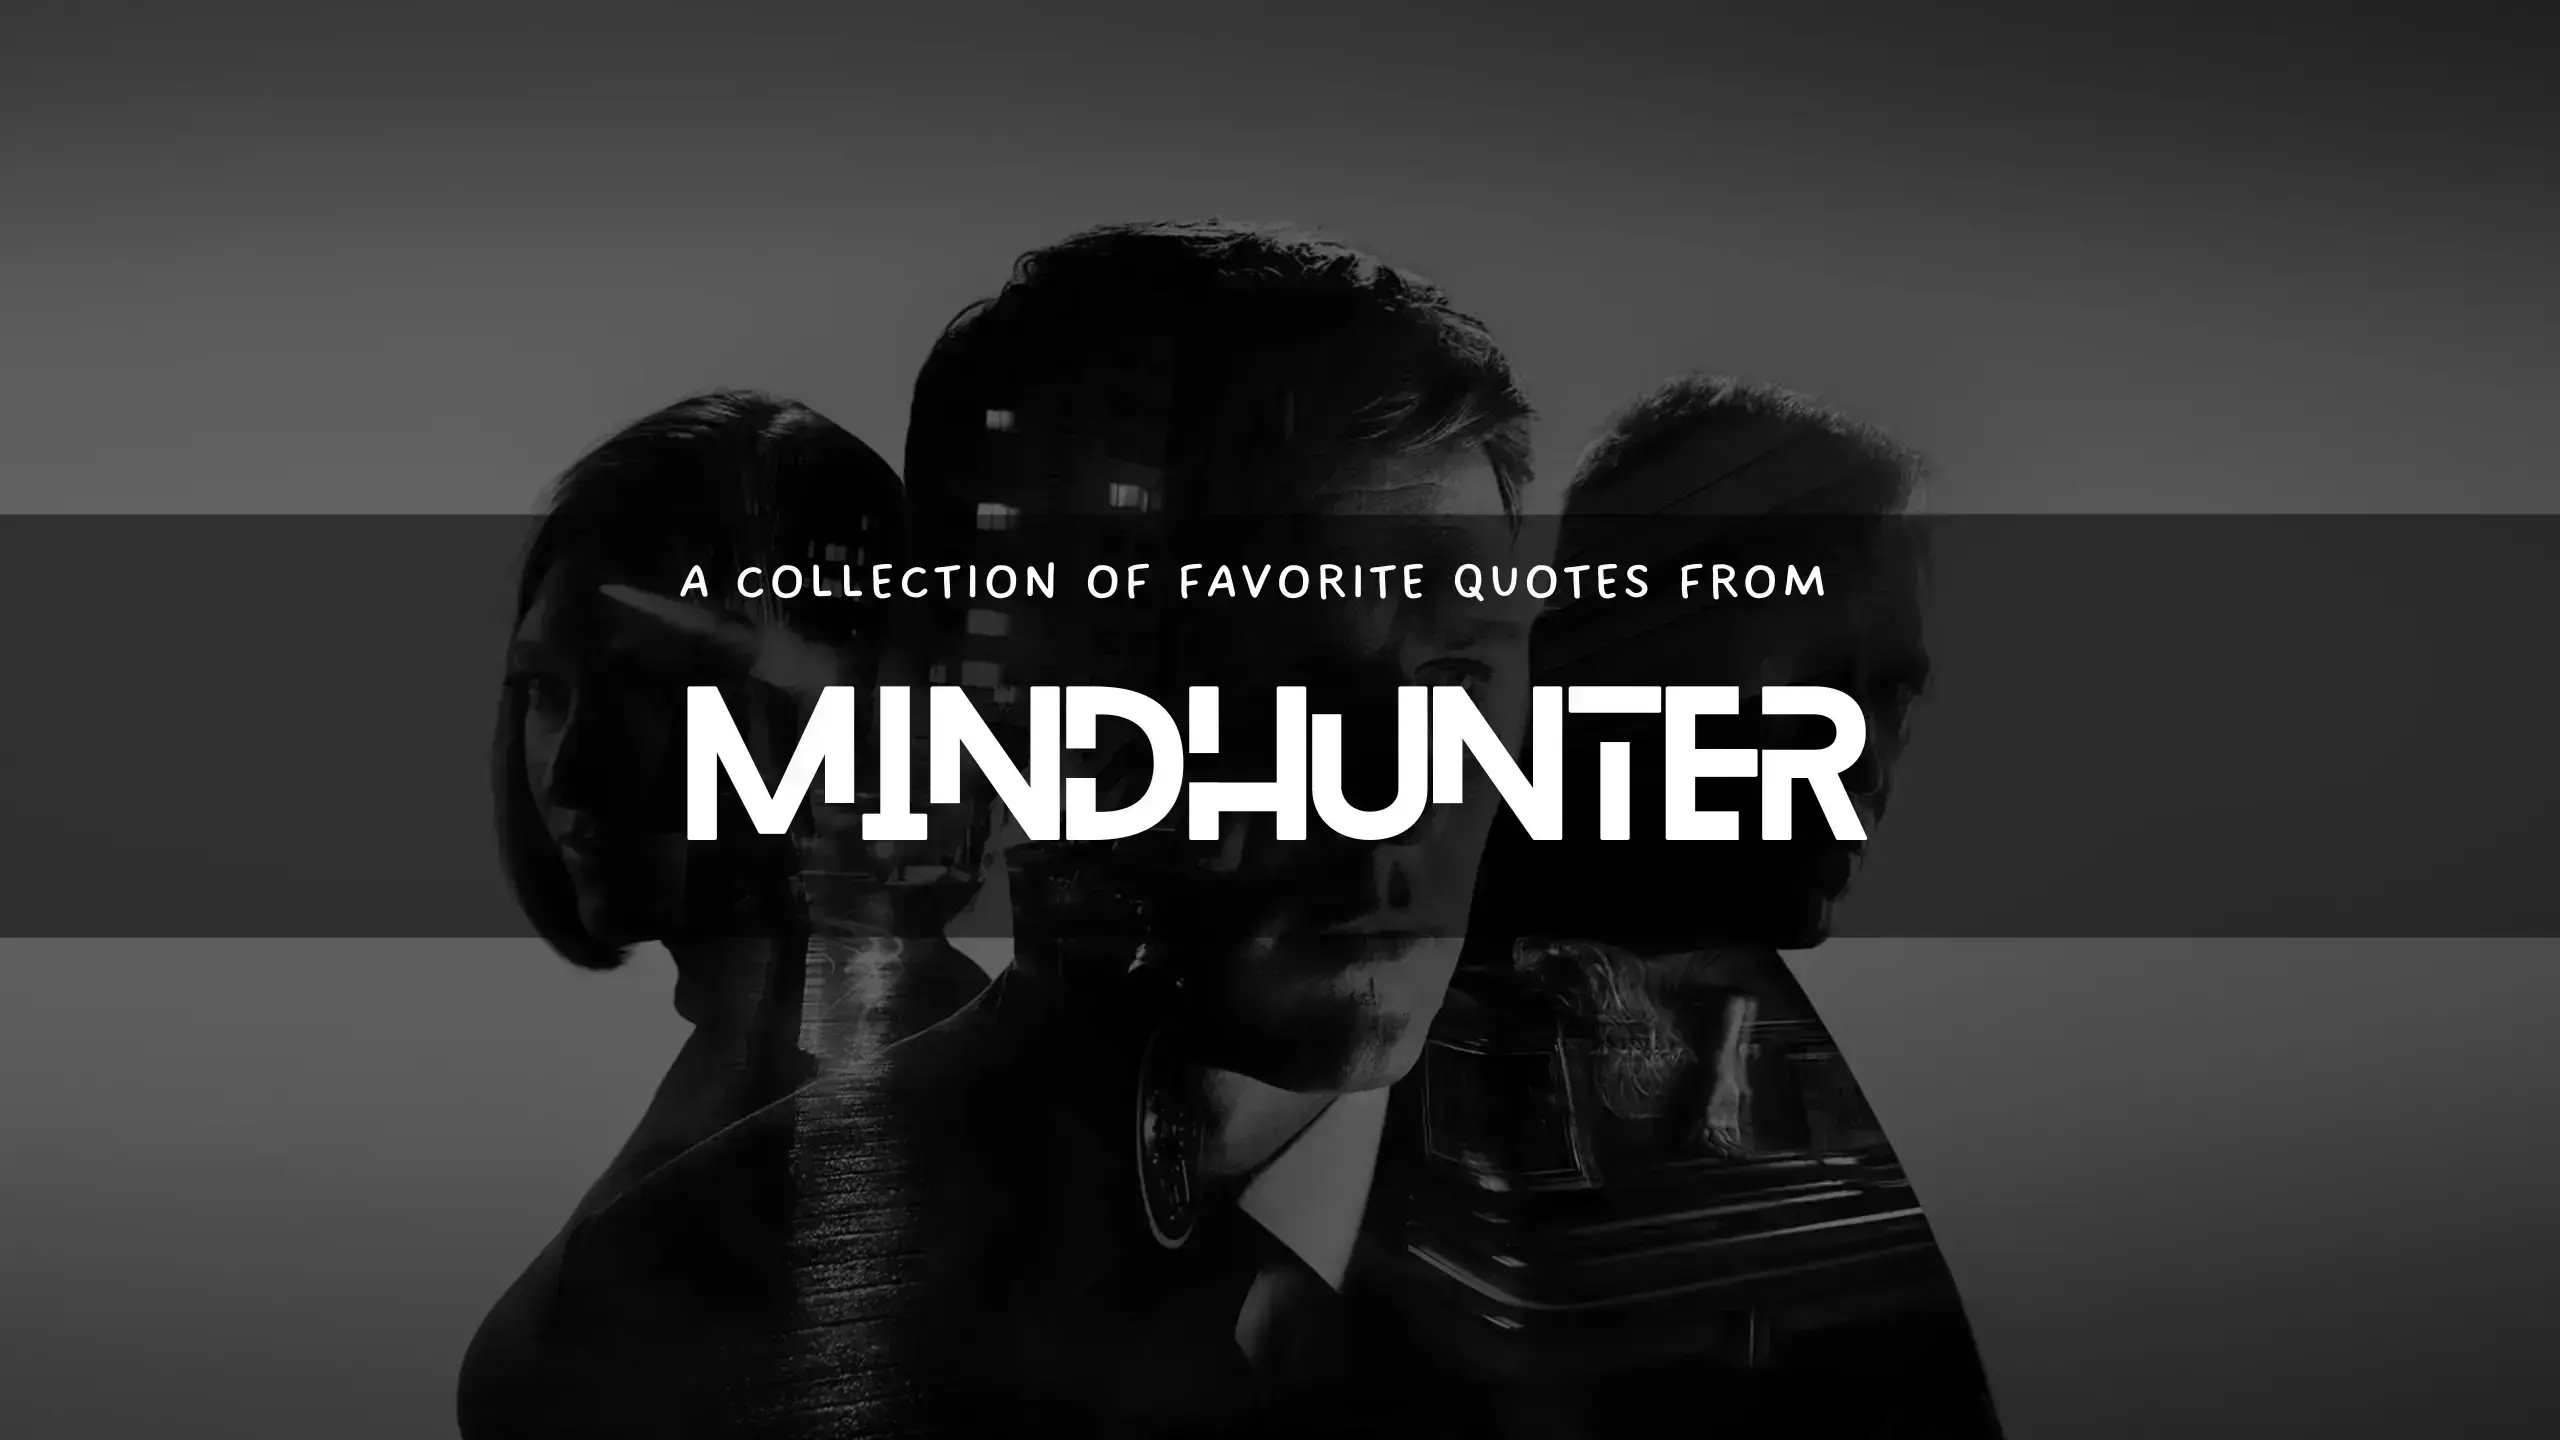 Awesome quotes from Mindhunter